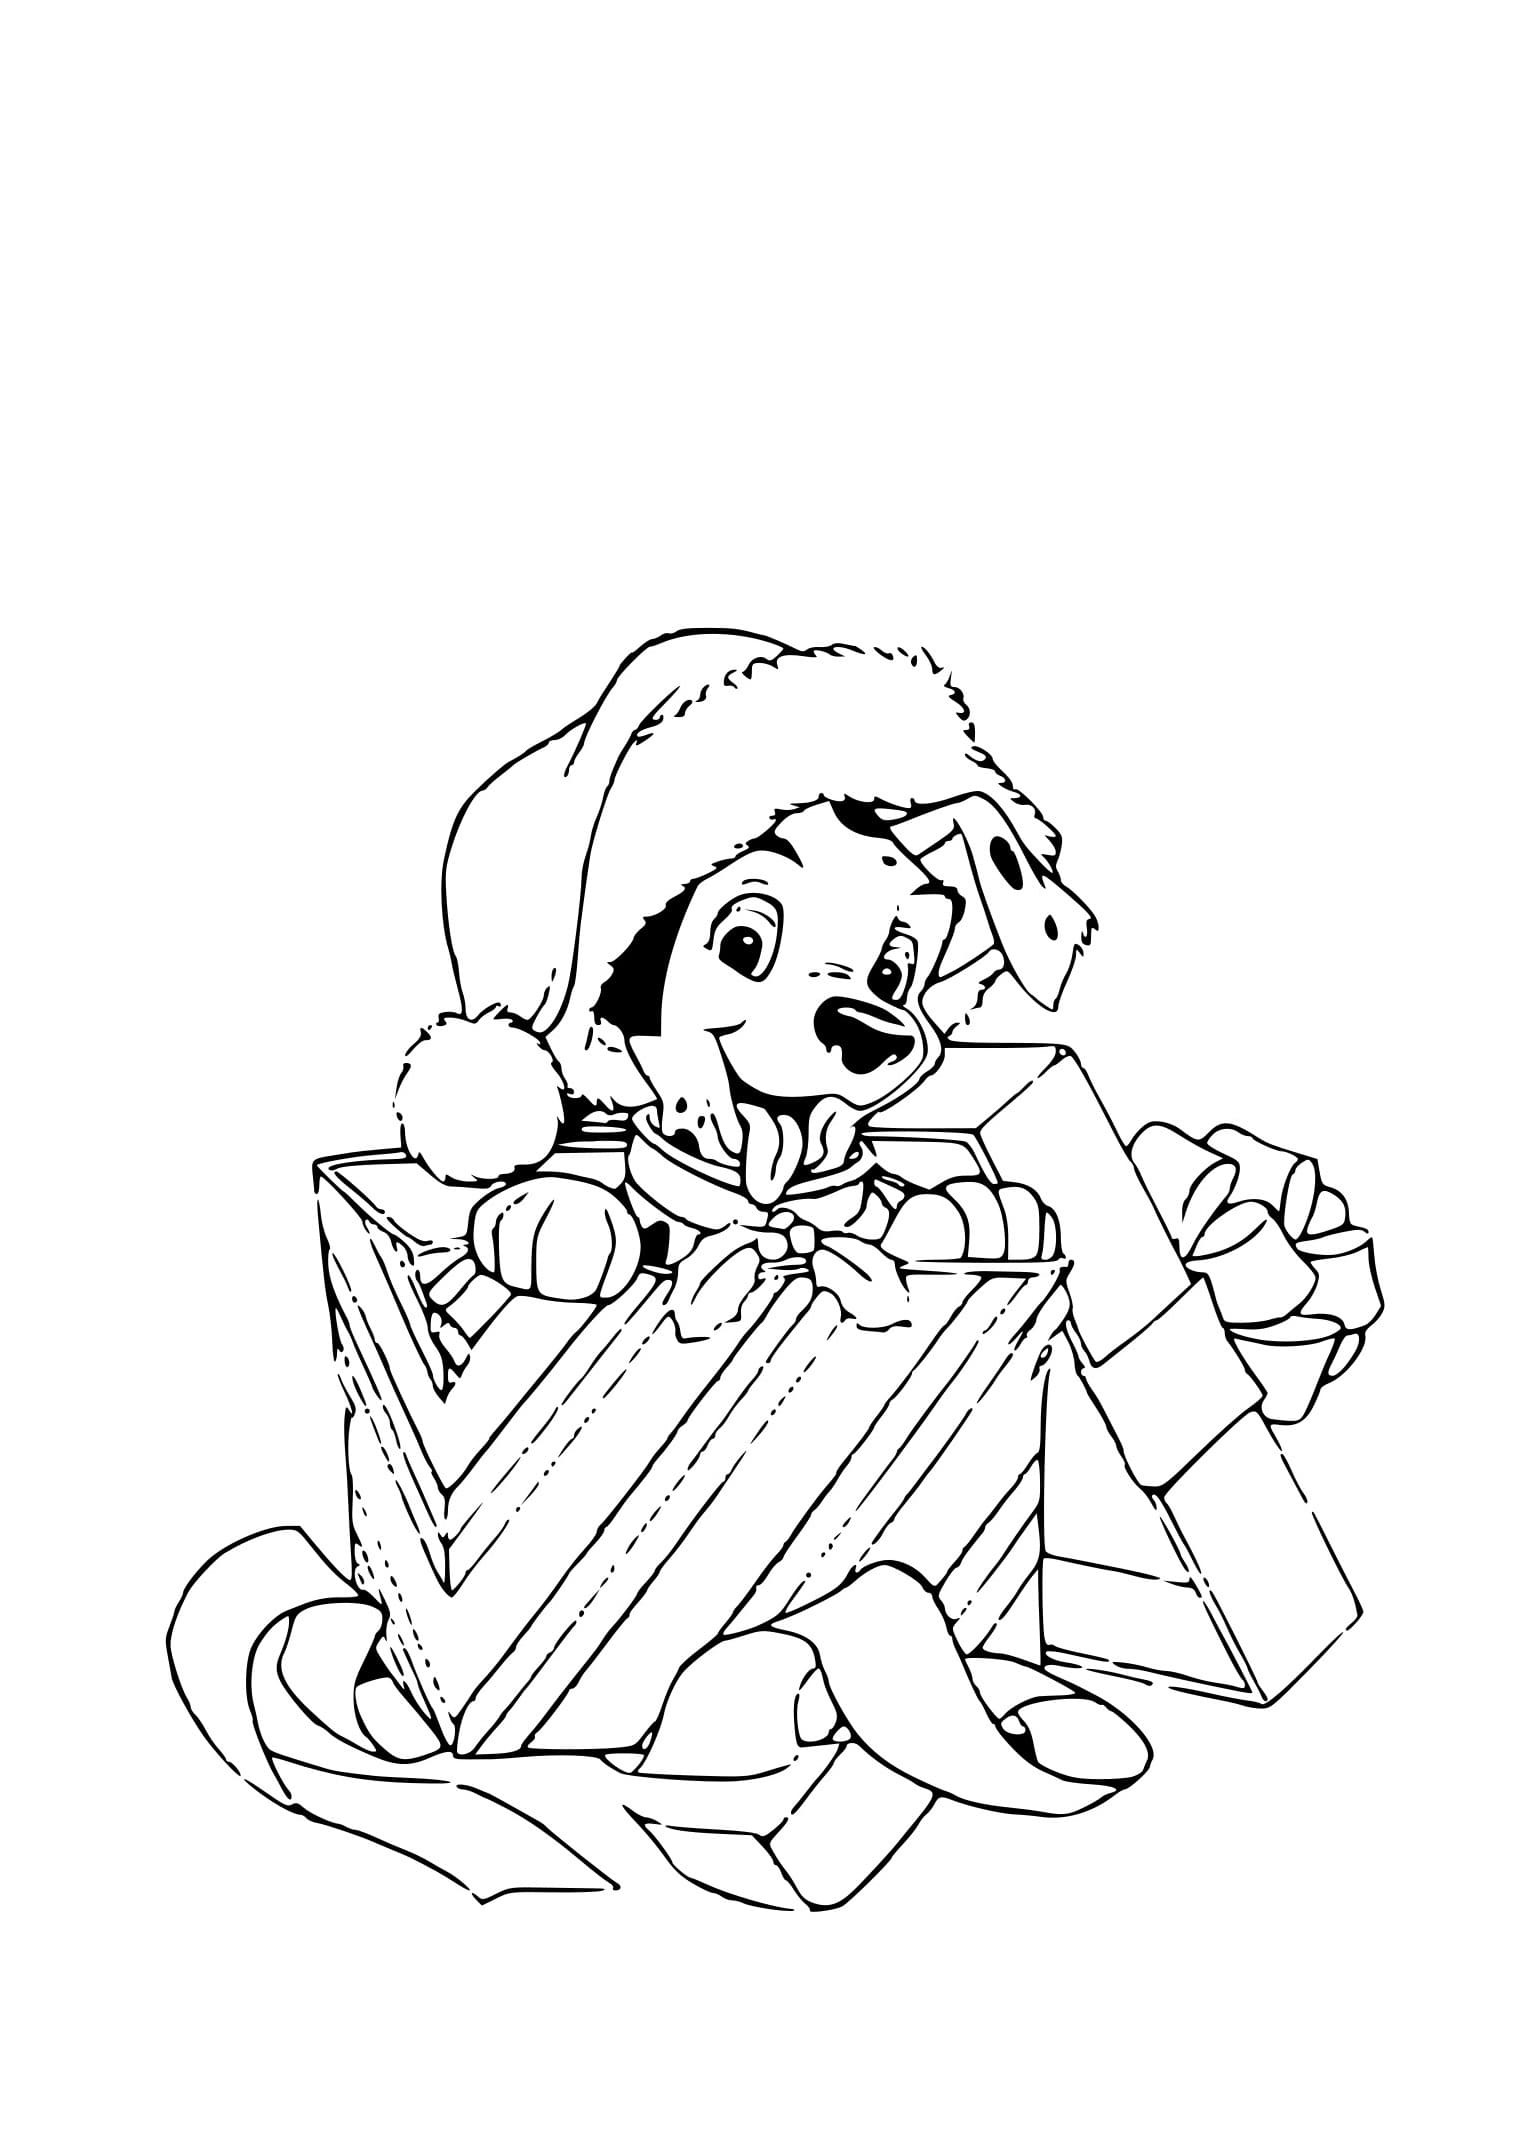 Christmas Puppy Coloring Pages   20 images Free Printable